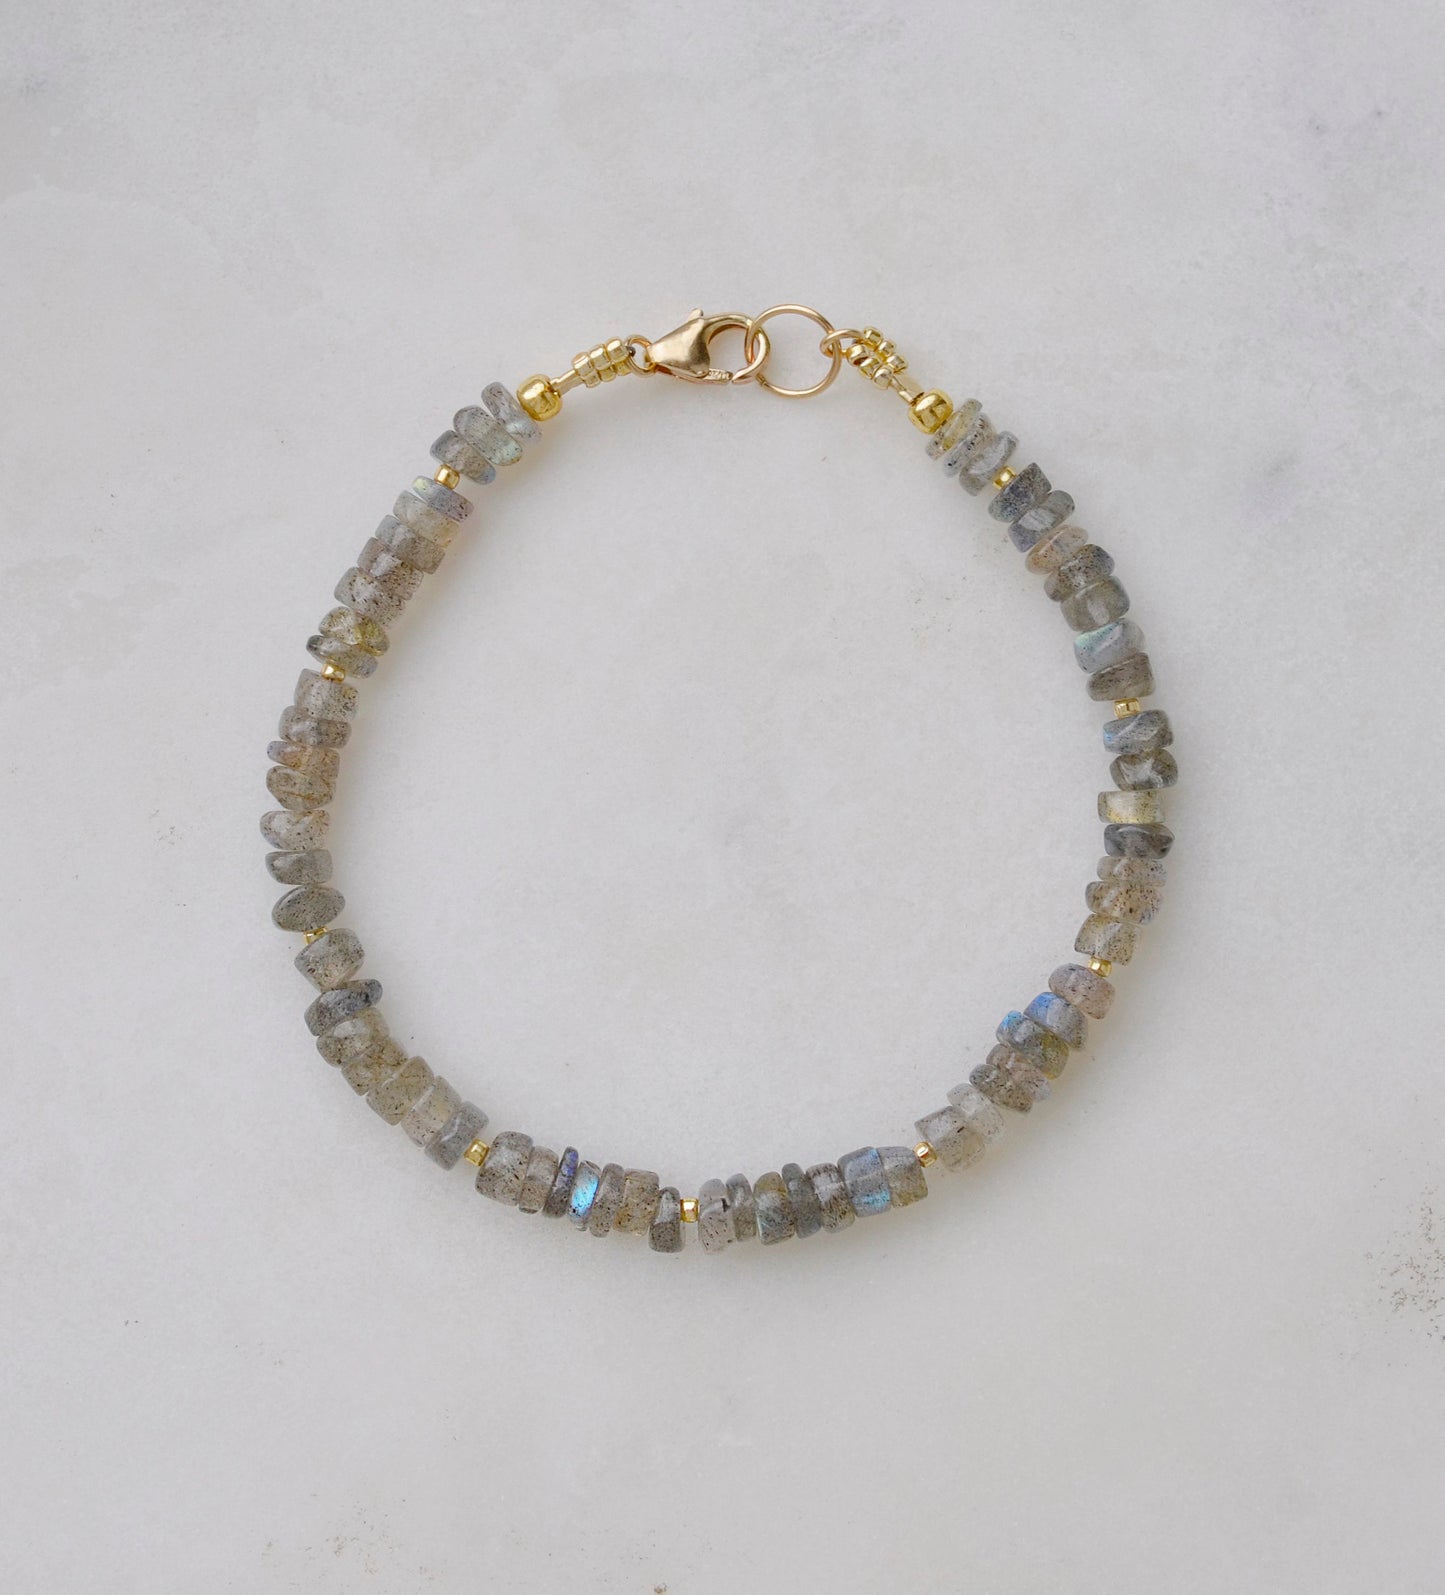 Blue flashing natural heishi or wheel shaped Labradorite gemstones strung together onto a bracelet. Tiny gold beads act as spacers between the stones. The gold style is shown.